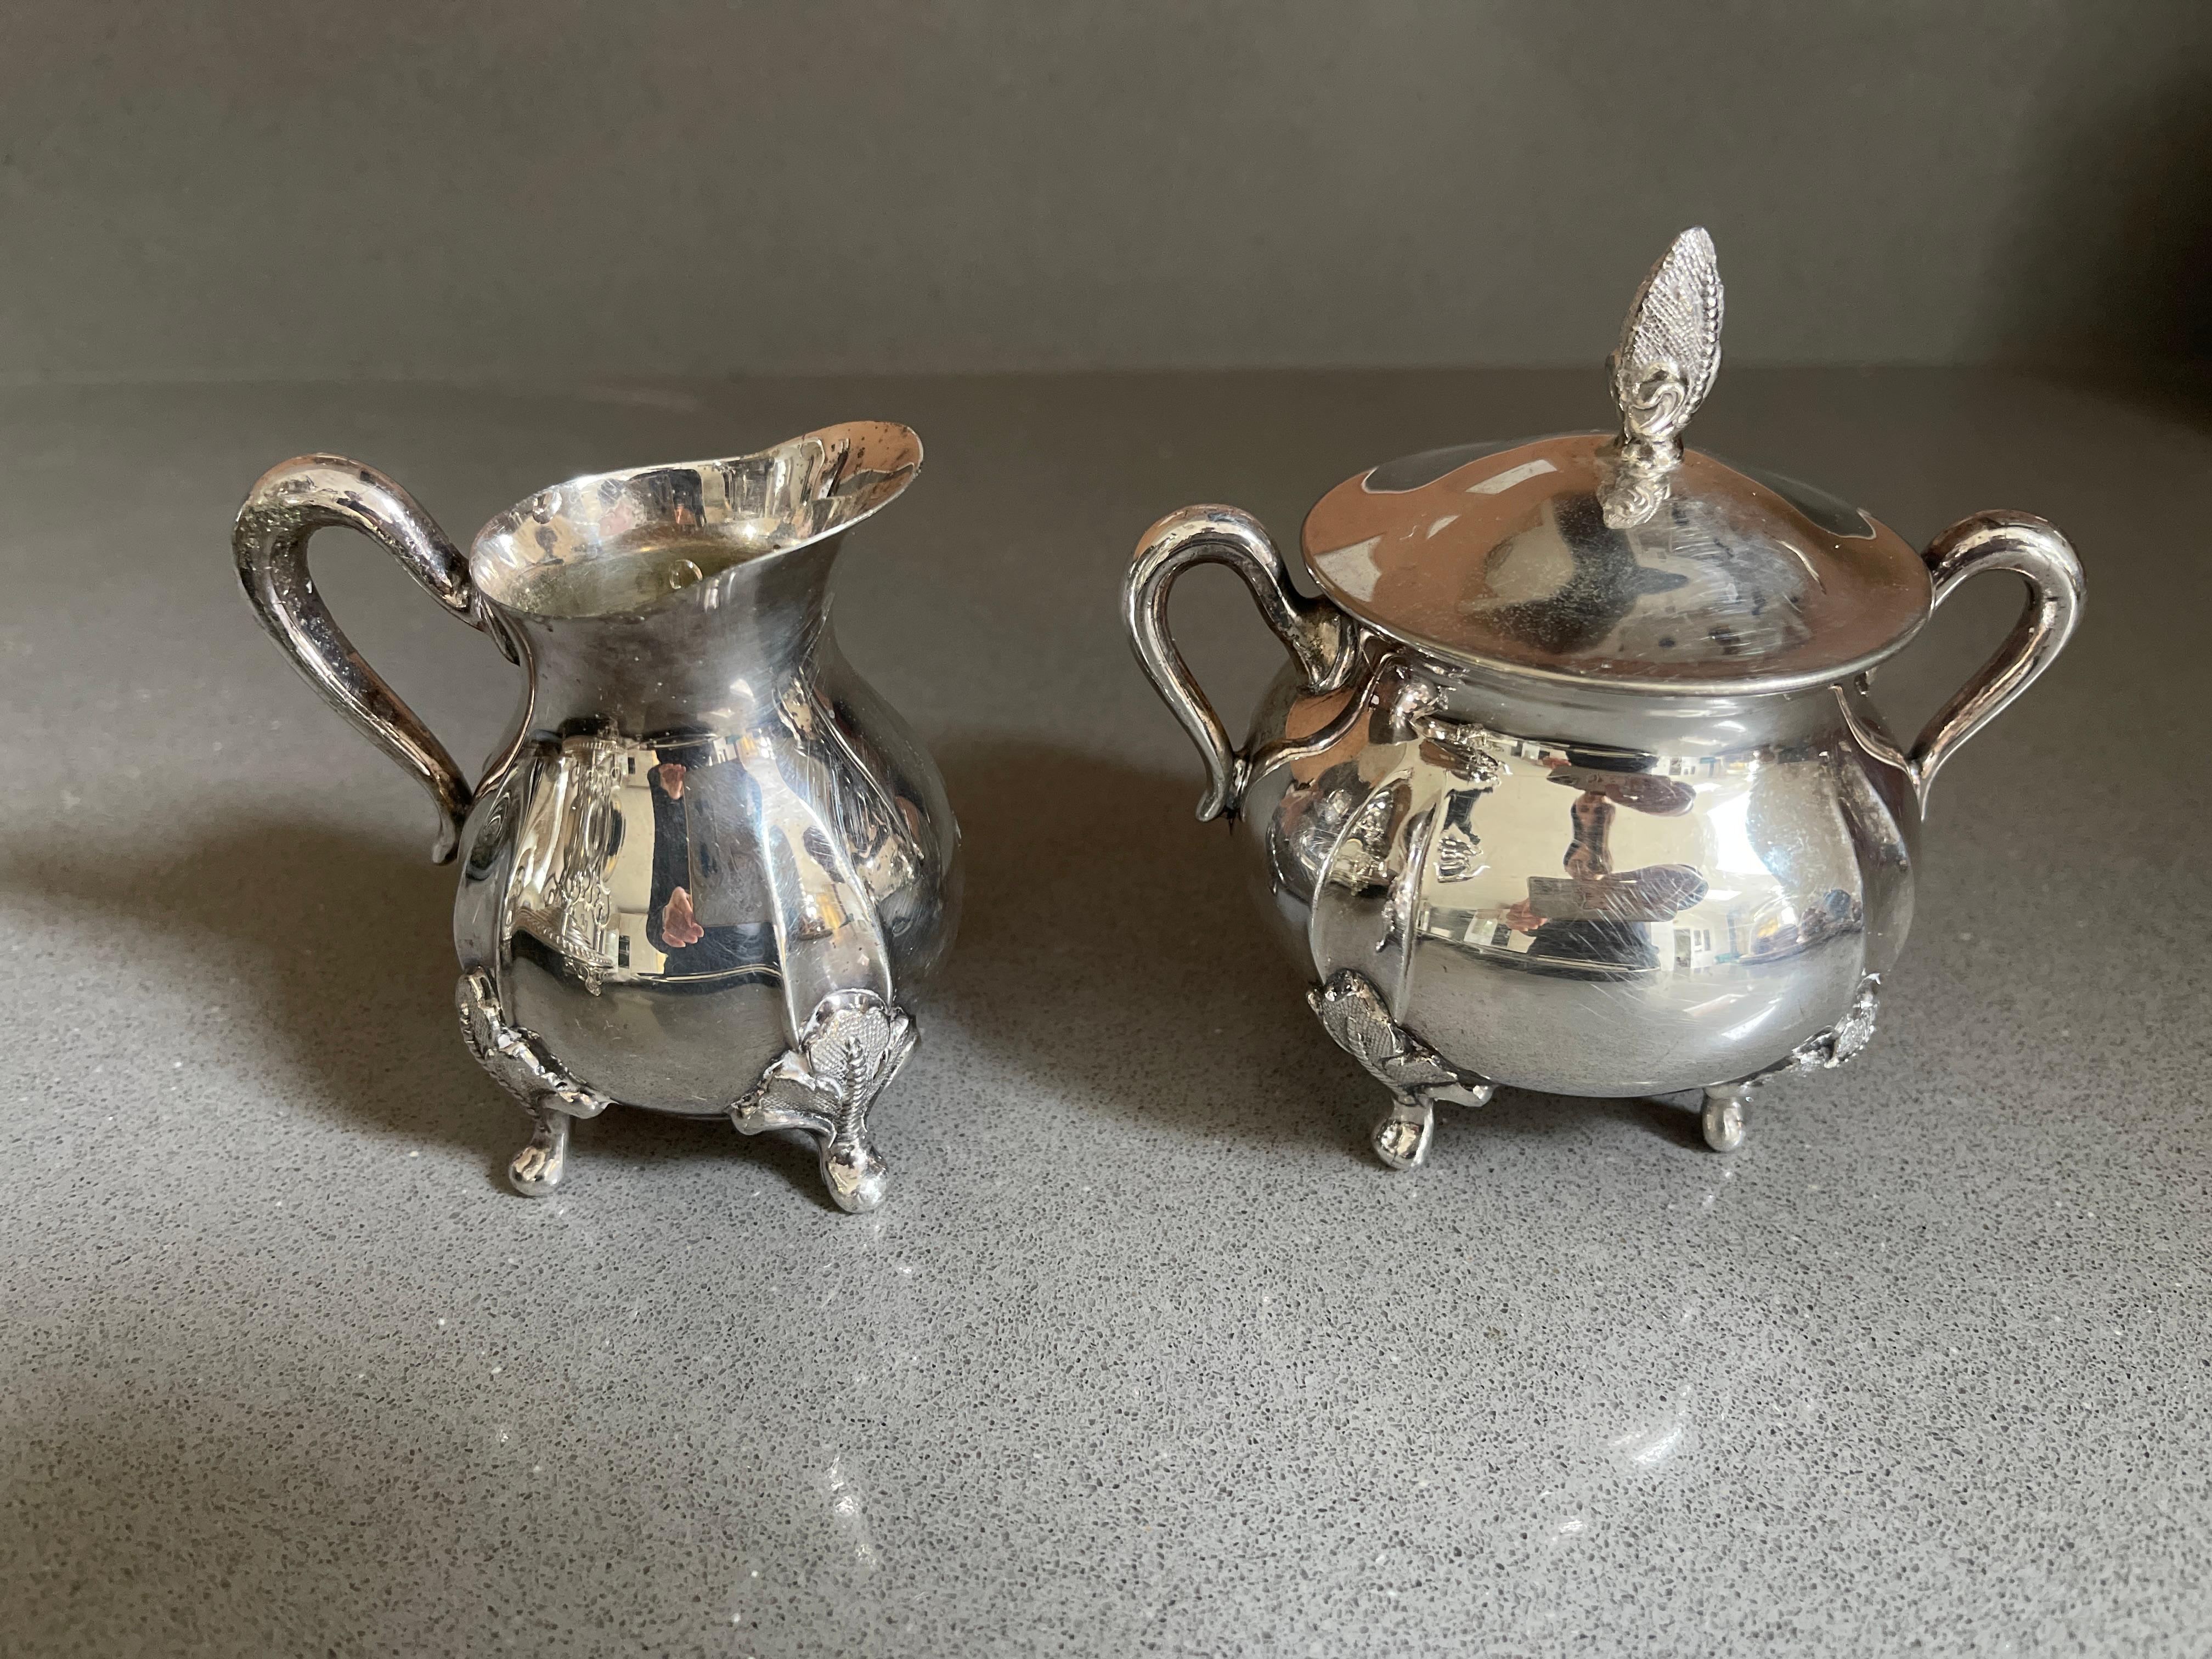 Antique Tea Set 3 Part English Silver, Serving Tray, Home Decorative Objects  For Sale 7